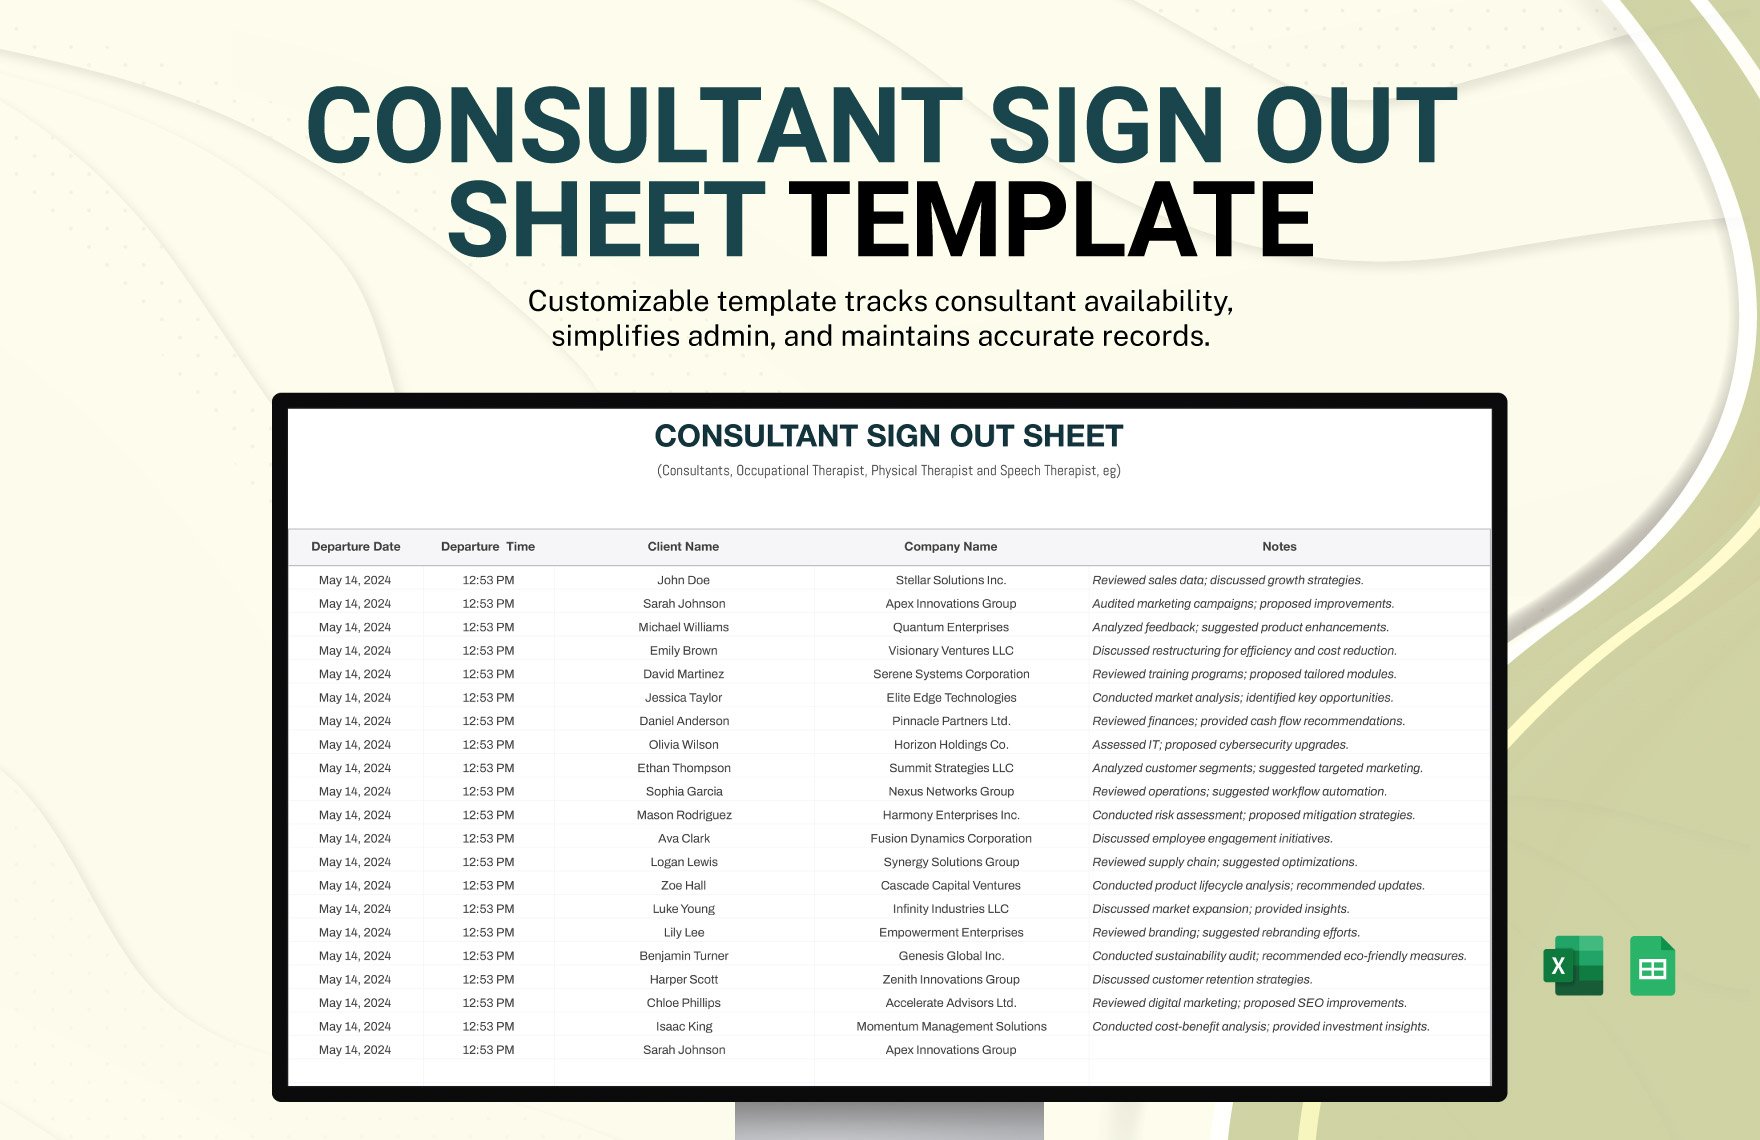 Consultant Sign Out Sheet Template in Excel, Google Sheets